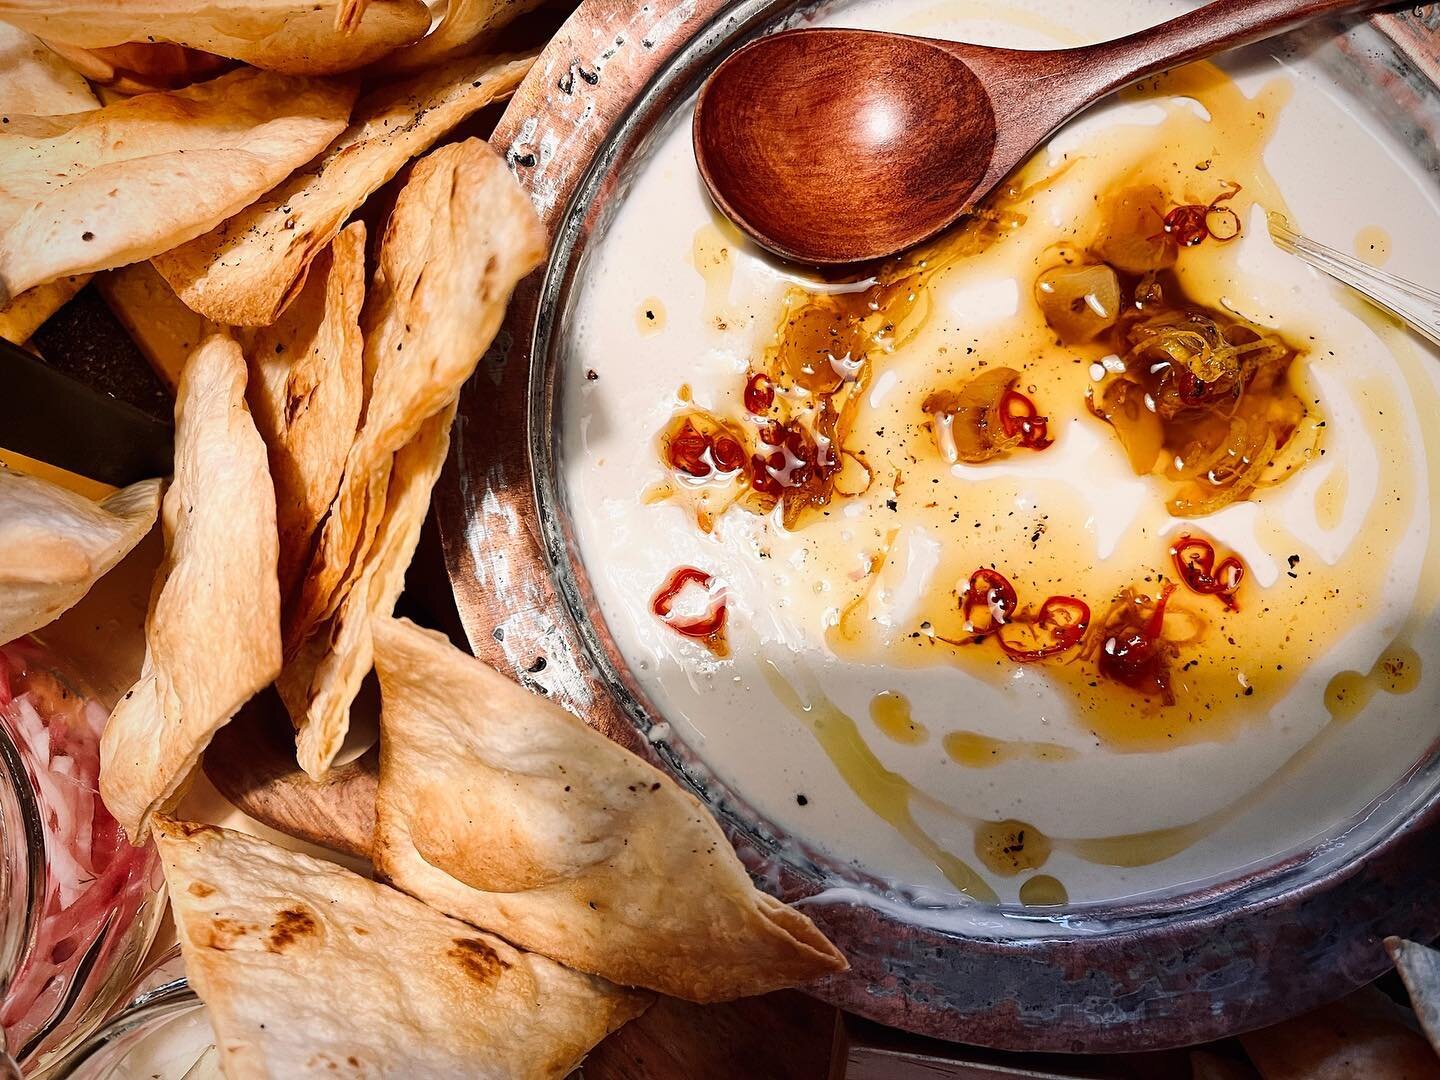 𝘕𝘦𝘸 𝘨𝘳𝘢𝘻𝘪𝘯𝘨 𝘵𝘢𝘣𝘭𝘦 𝘮𝘦𝘯𝘶 𝘪𝘵𝘦𝘮 👩🏼&zwj;🍳
Honey &amp; black garlic whipped feta with lemon, pepper &amp; chilli oil. Served with our oven baked garlic tortilla chips. On all our tables from now&hellip; Until I get sick of it 🥂